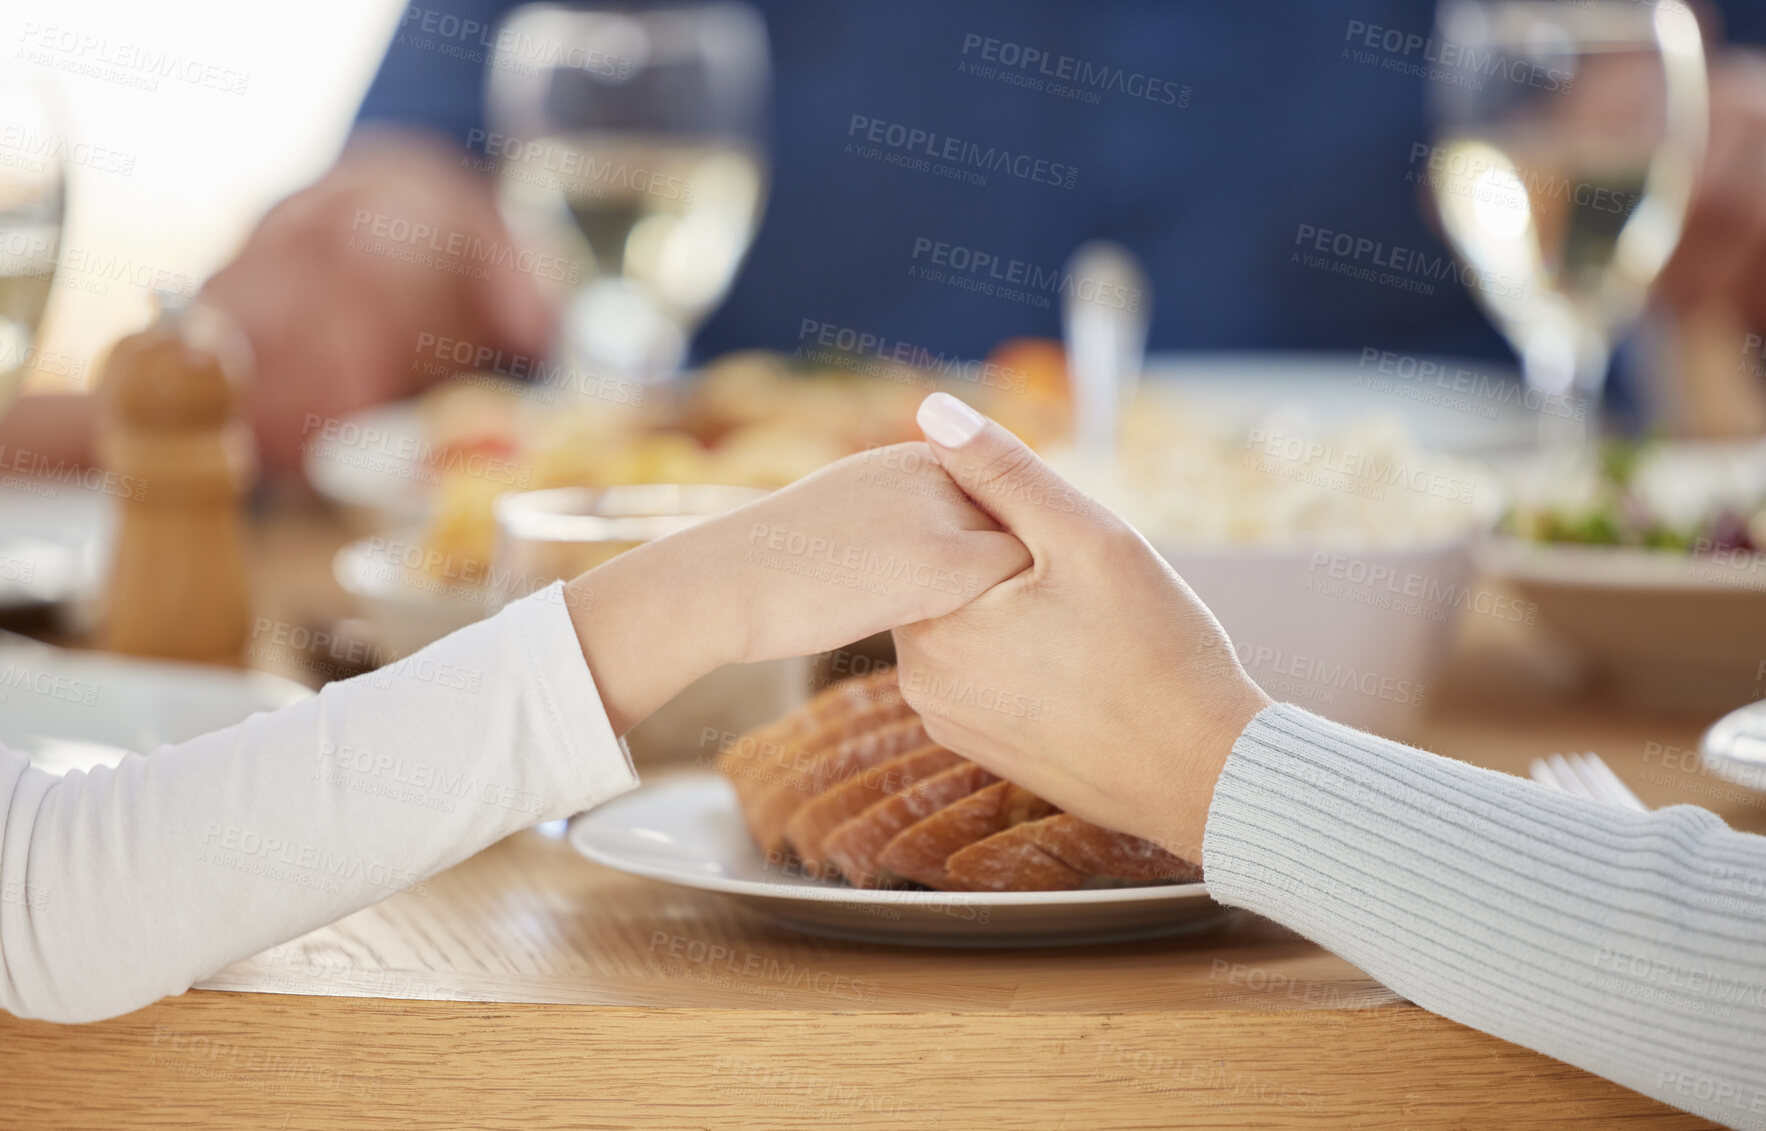 Buy stock photo Shot of two unrecognizable people holding hands at the dinner table at home